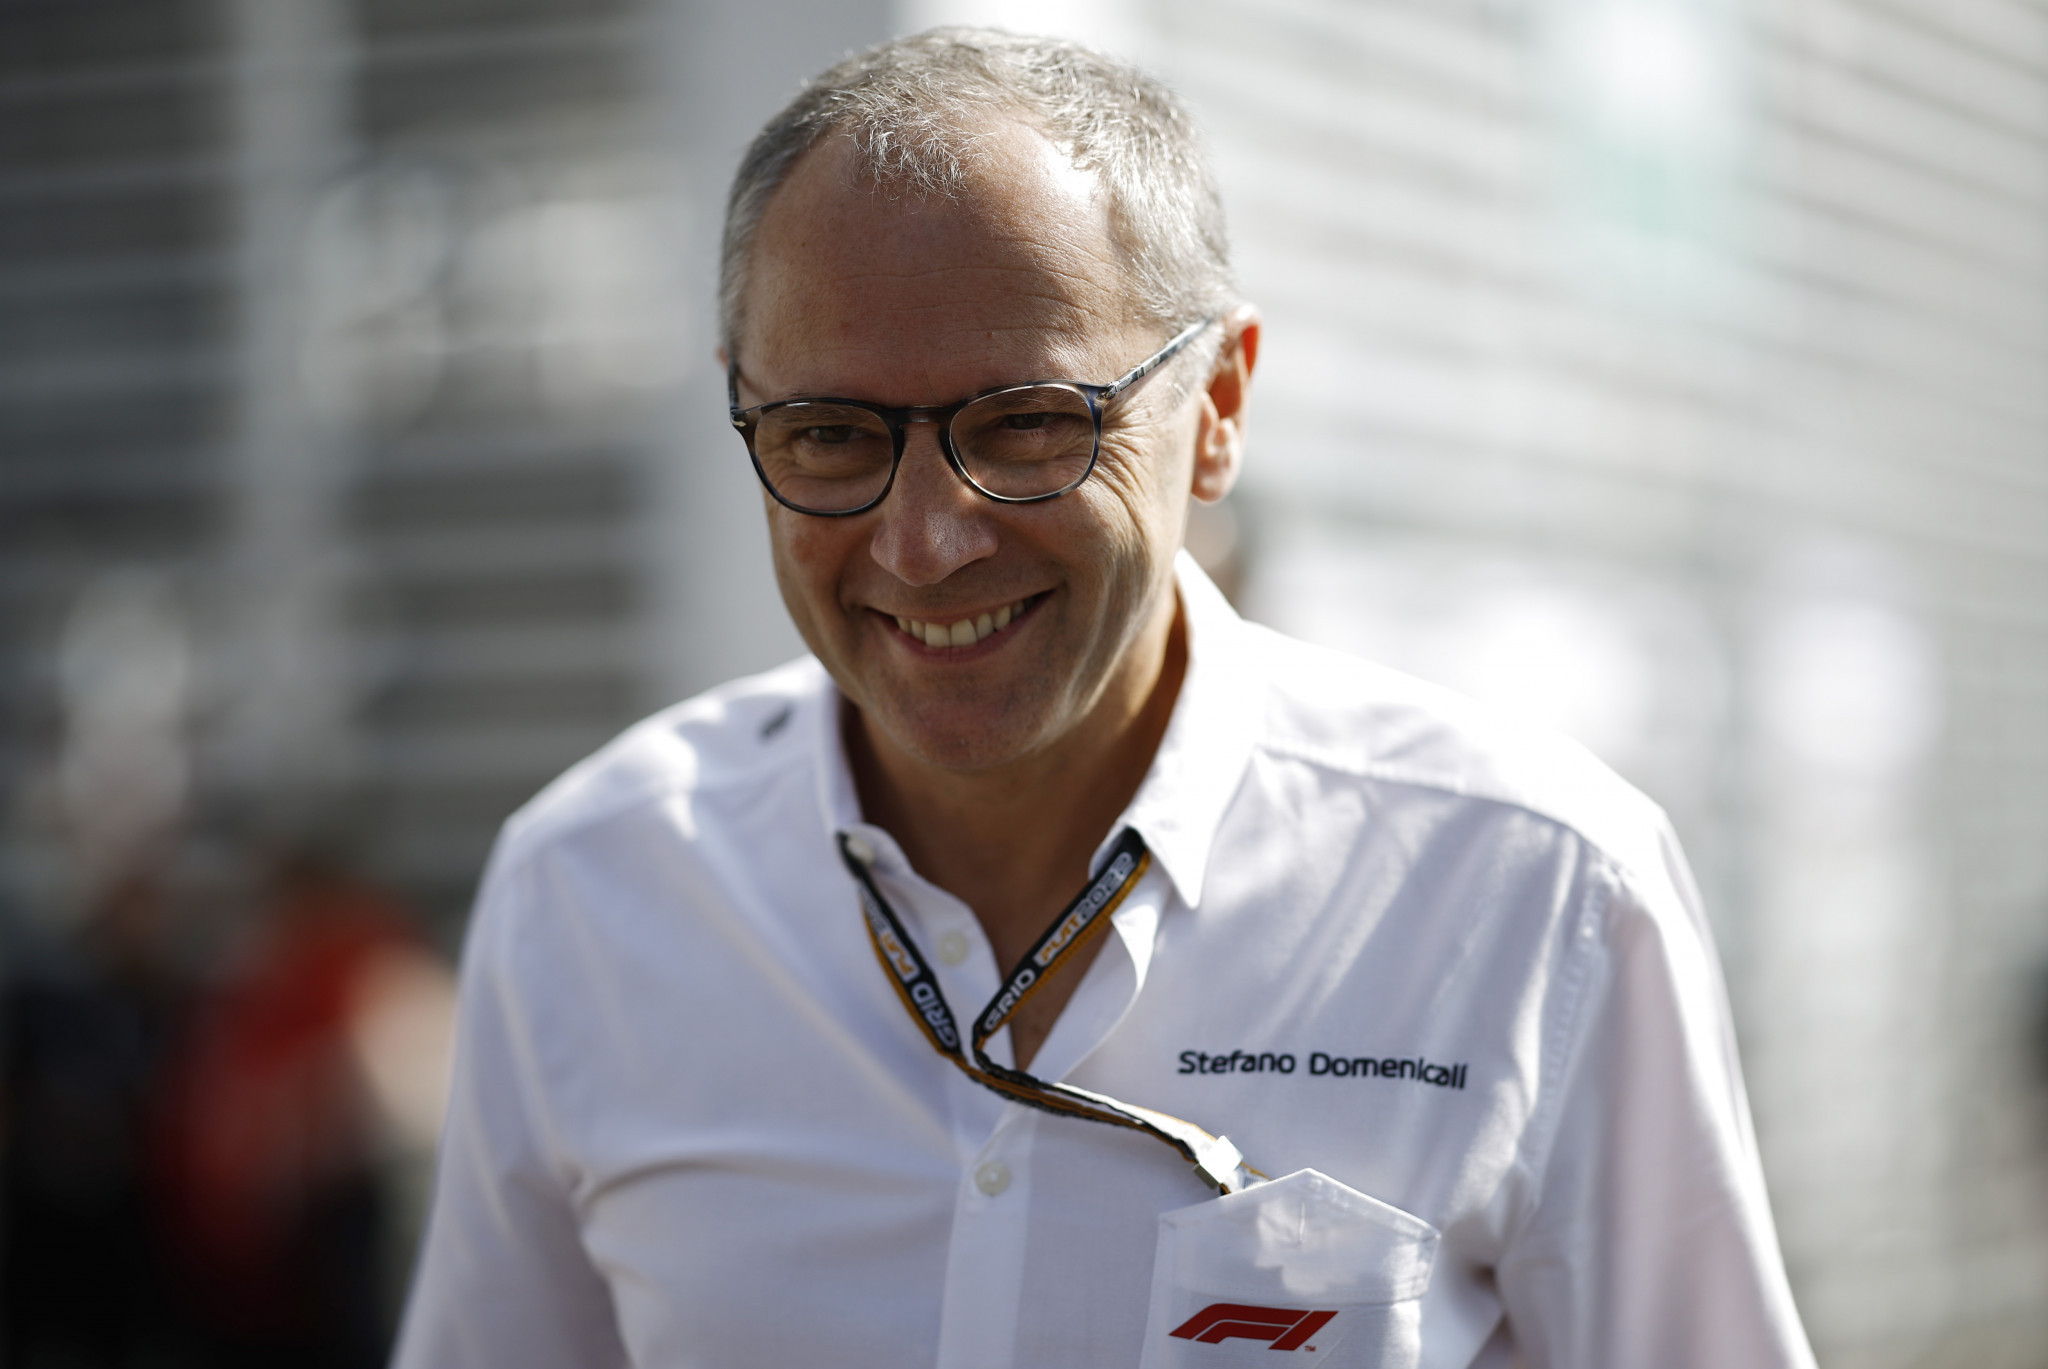 Stefano Domenicali visited Barranquilla recently to inspect interest in Formula One ©Getty Images